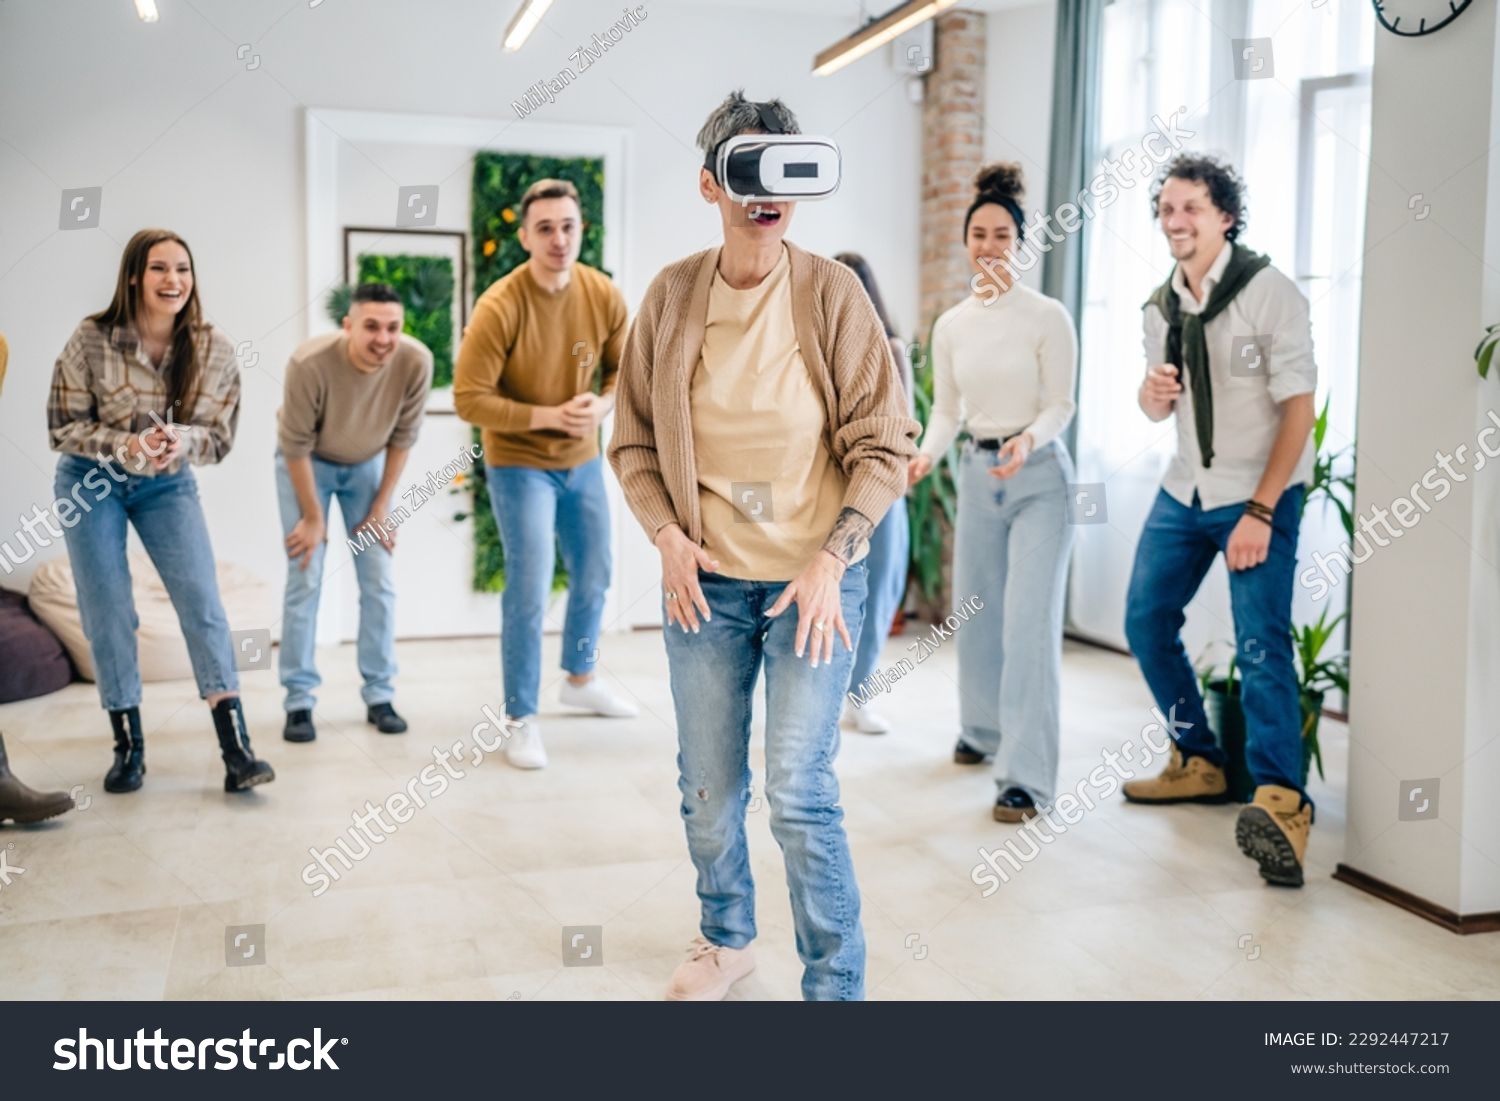 One woman mature senior caucasian female in front of group of men and women friends enjoy virtual reality VR headset at work having fun together during team building seminar real people bright filter #2292447217